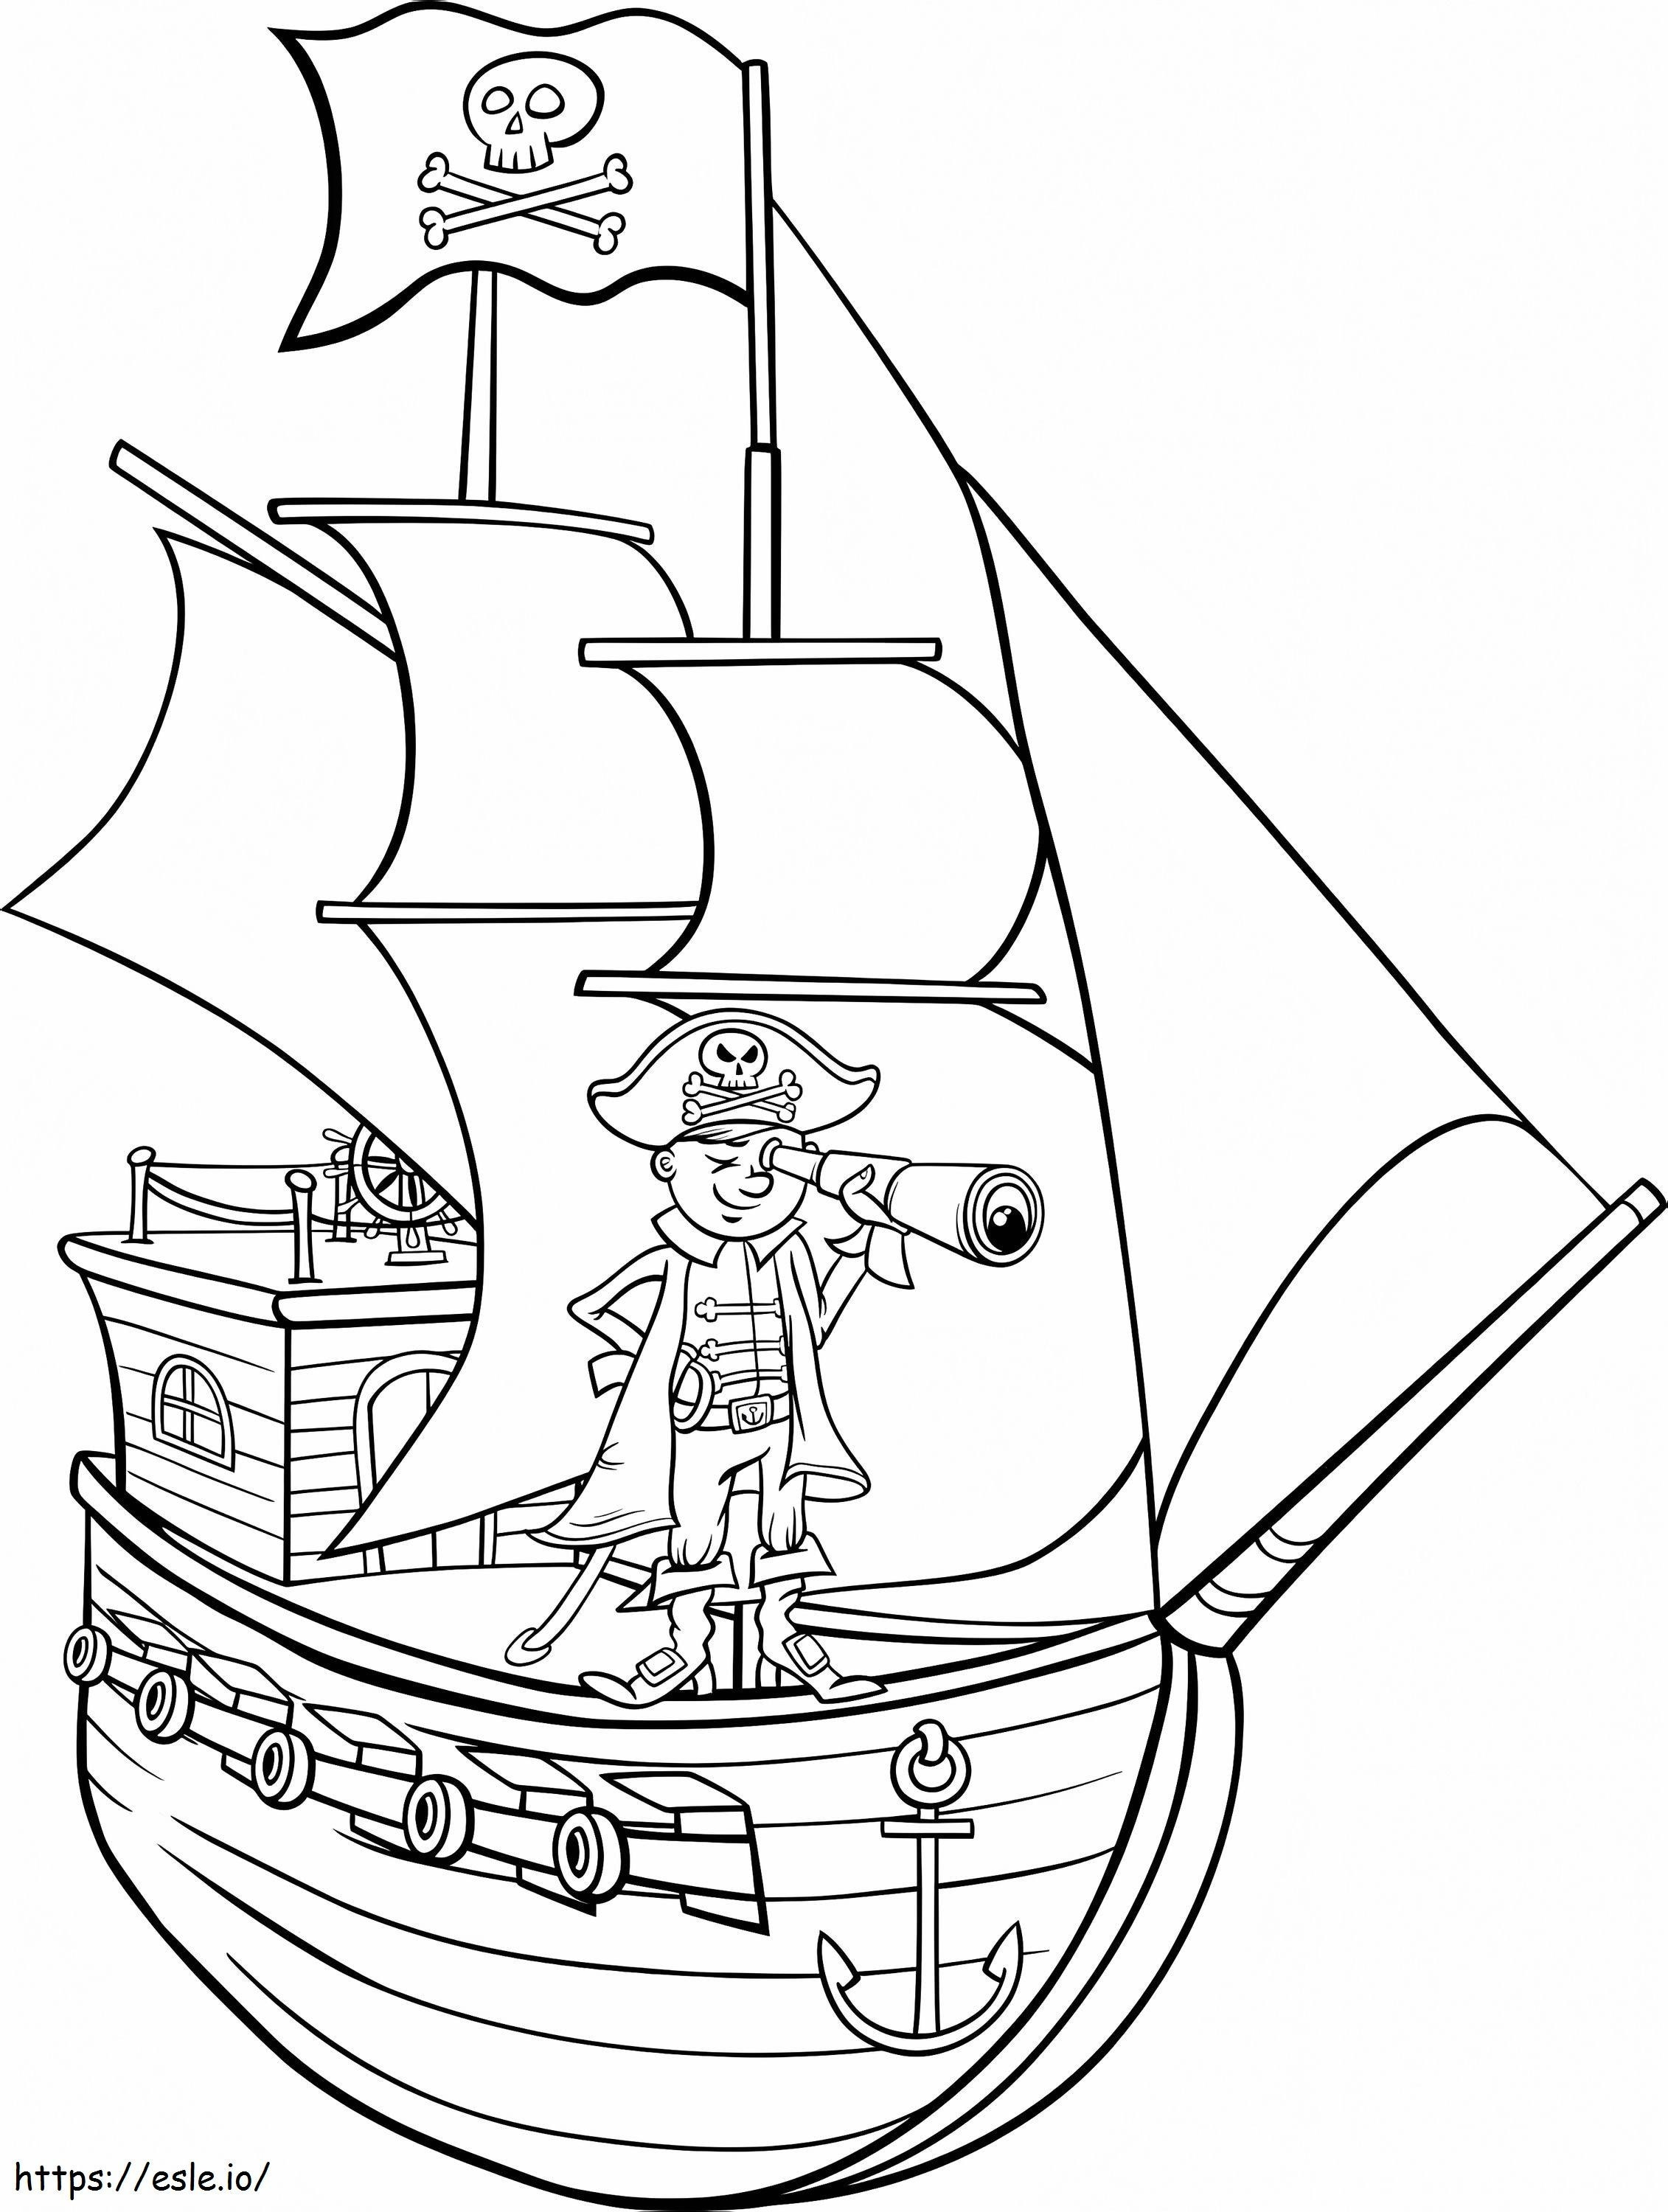 Pirate Ship Coloring Page 4 coloring page